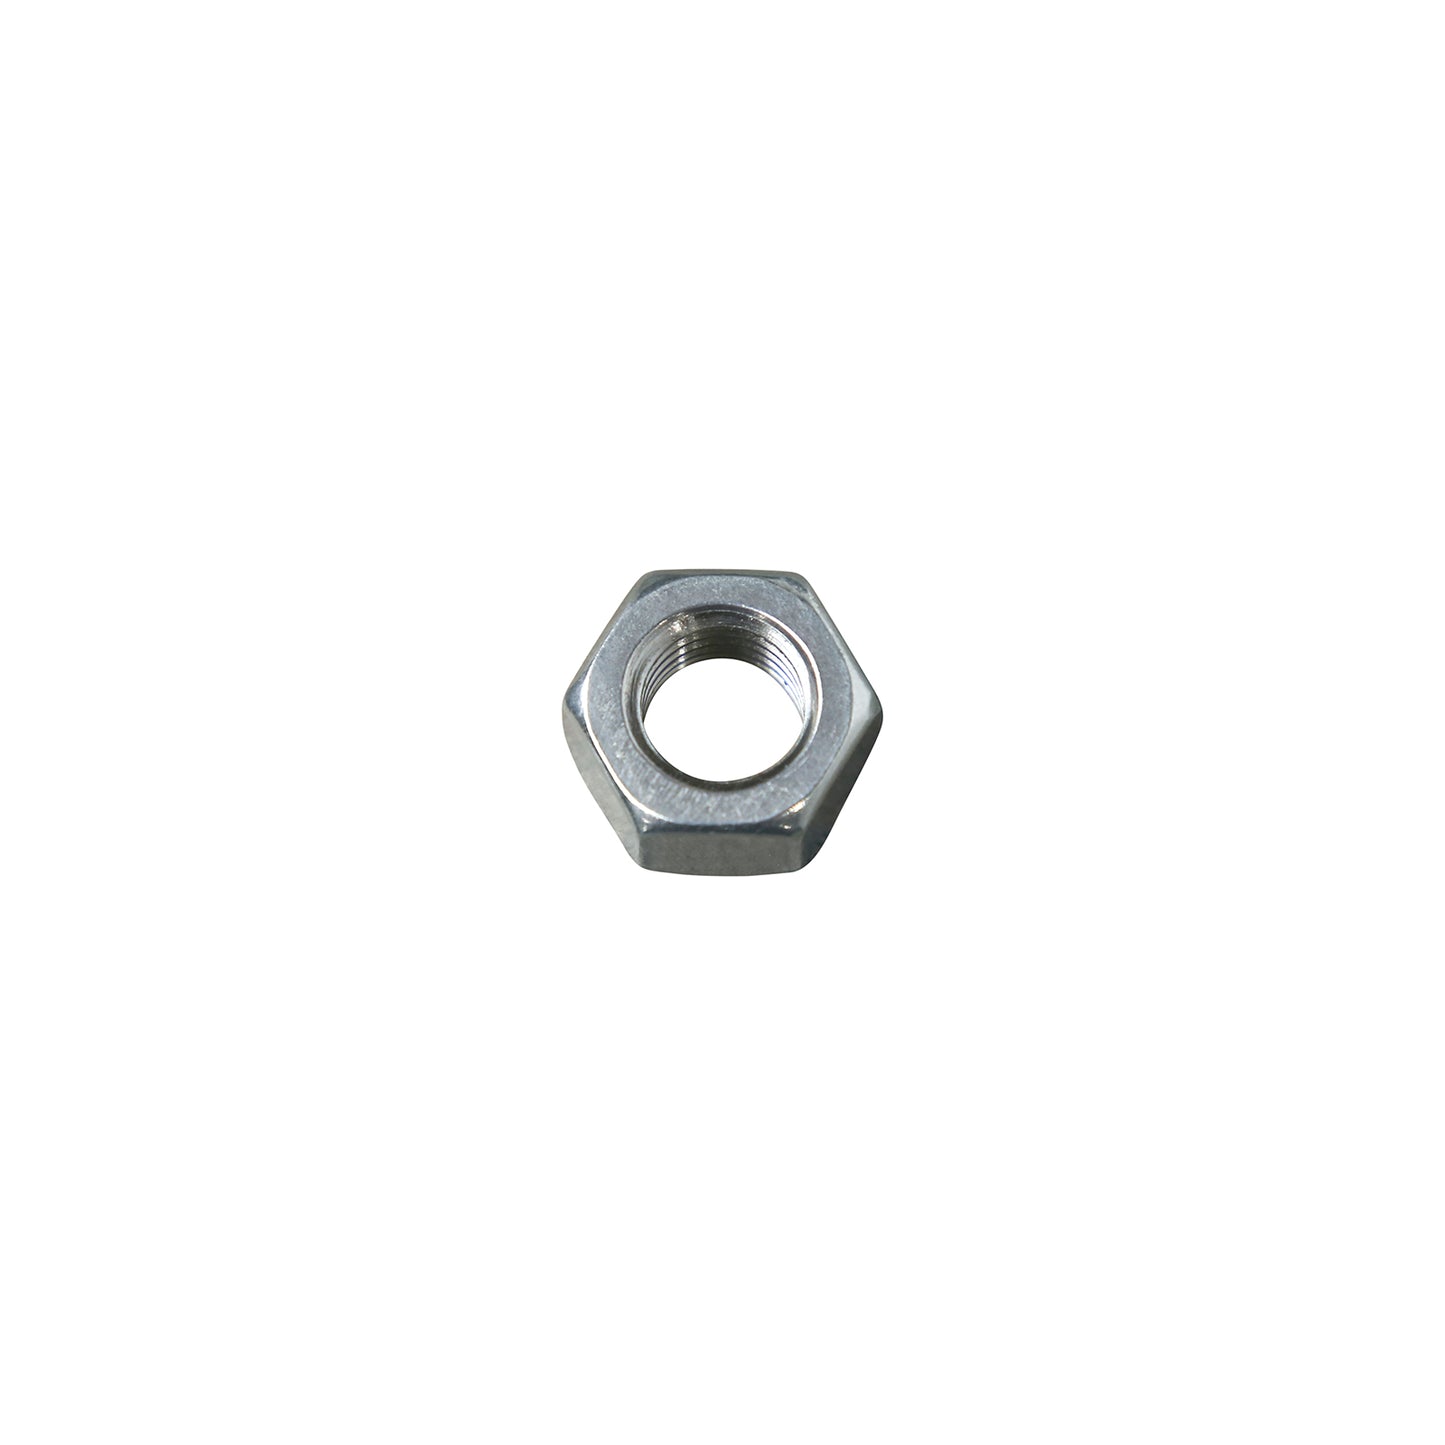 1/2"-13 Conquest Hex Nut - 304 Stainless Steel